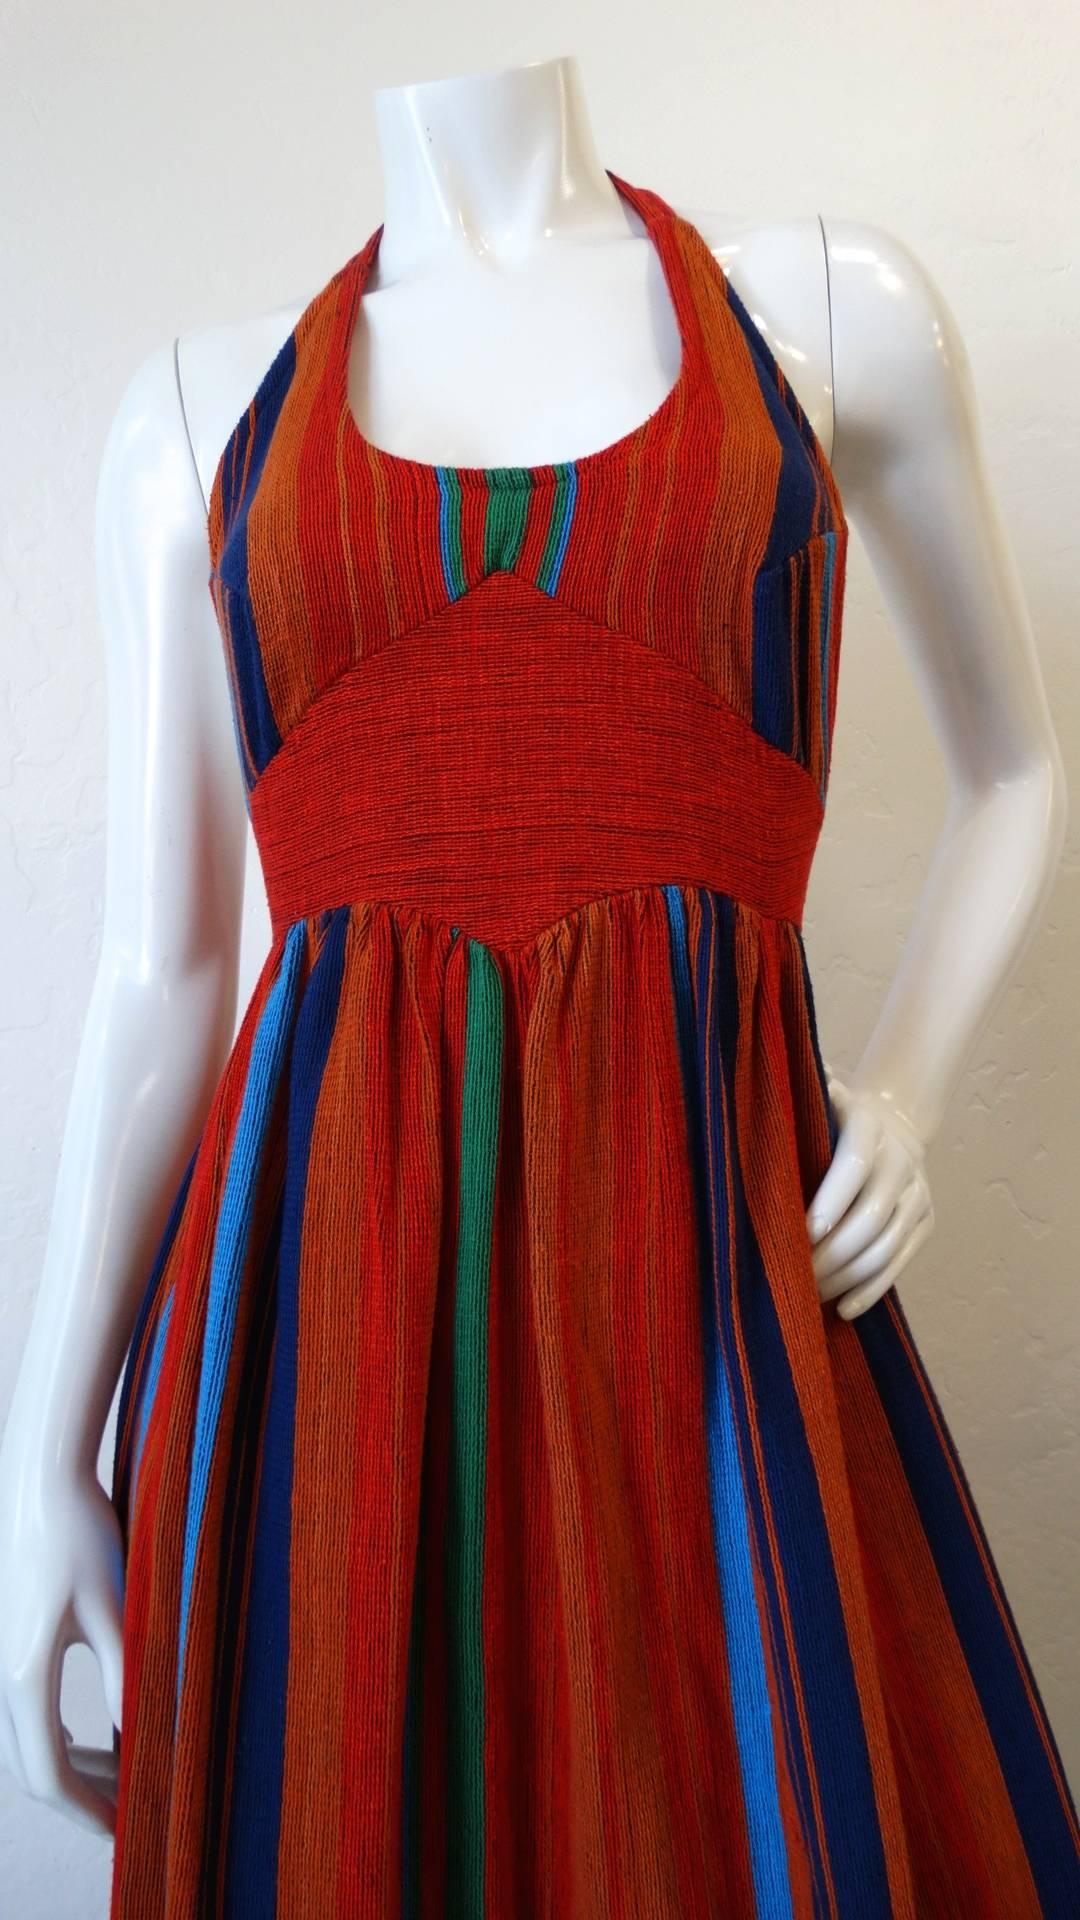 We're falling in love with Israeli designer Rikma- and you will too with our amazing 1970s halter dress! Made of a thick woven cotton fabric in Rikma's signature striped pattern in shades of red, orange, blue and green. Halter style silhouette with